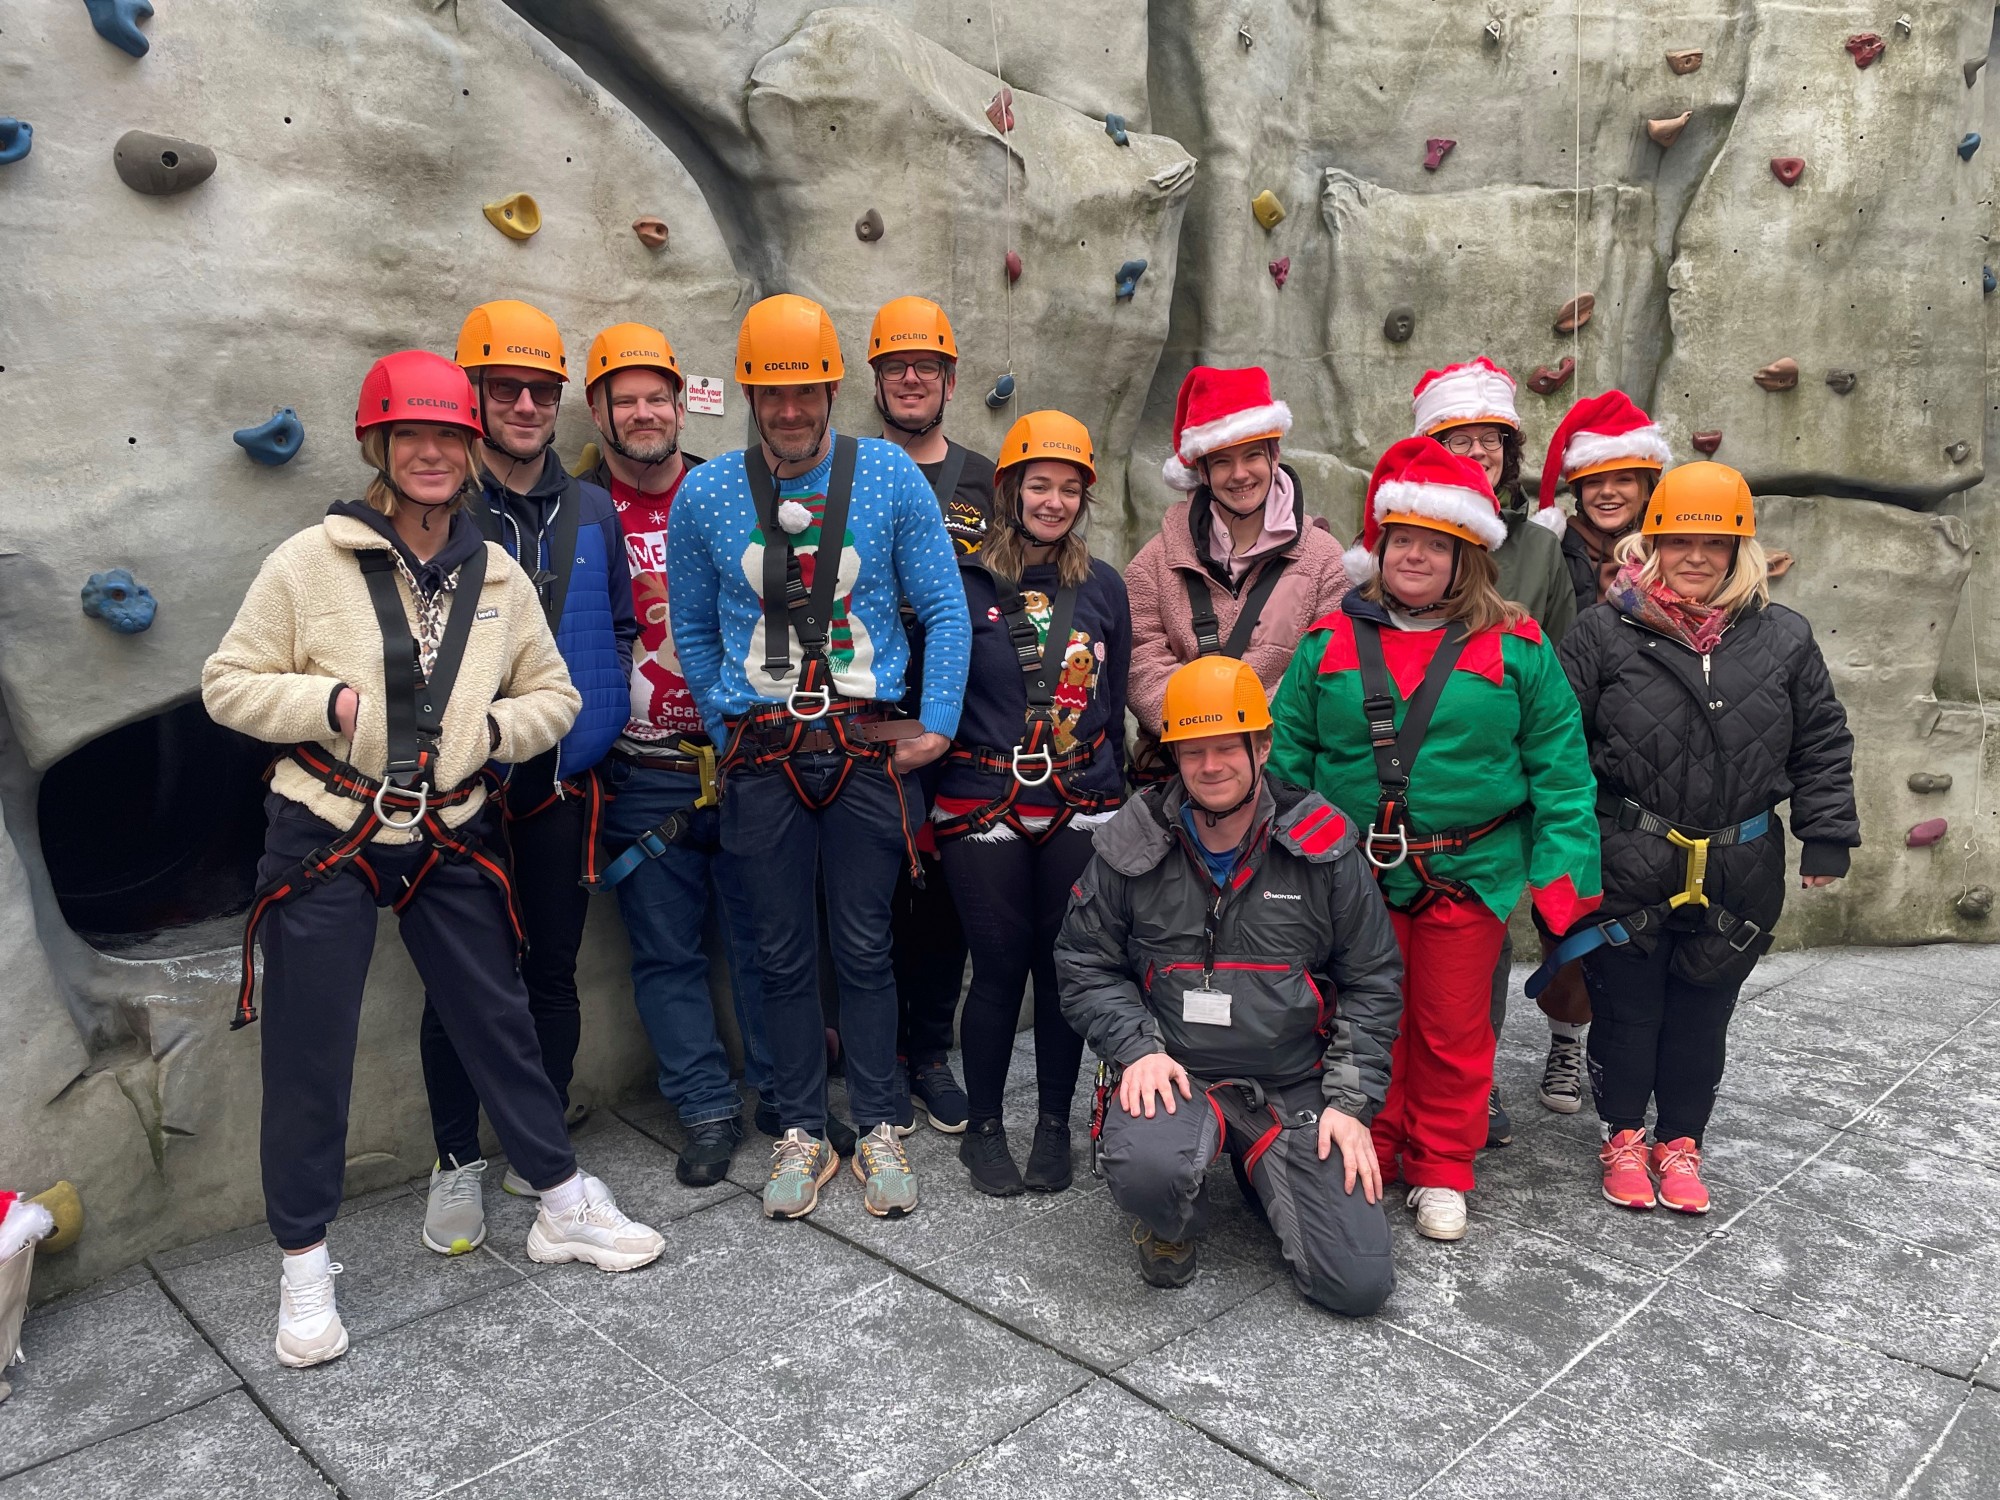 Group photo of people abseiling